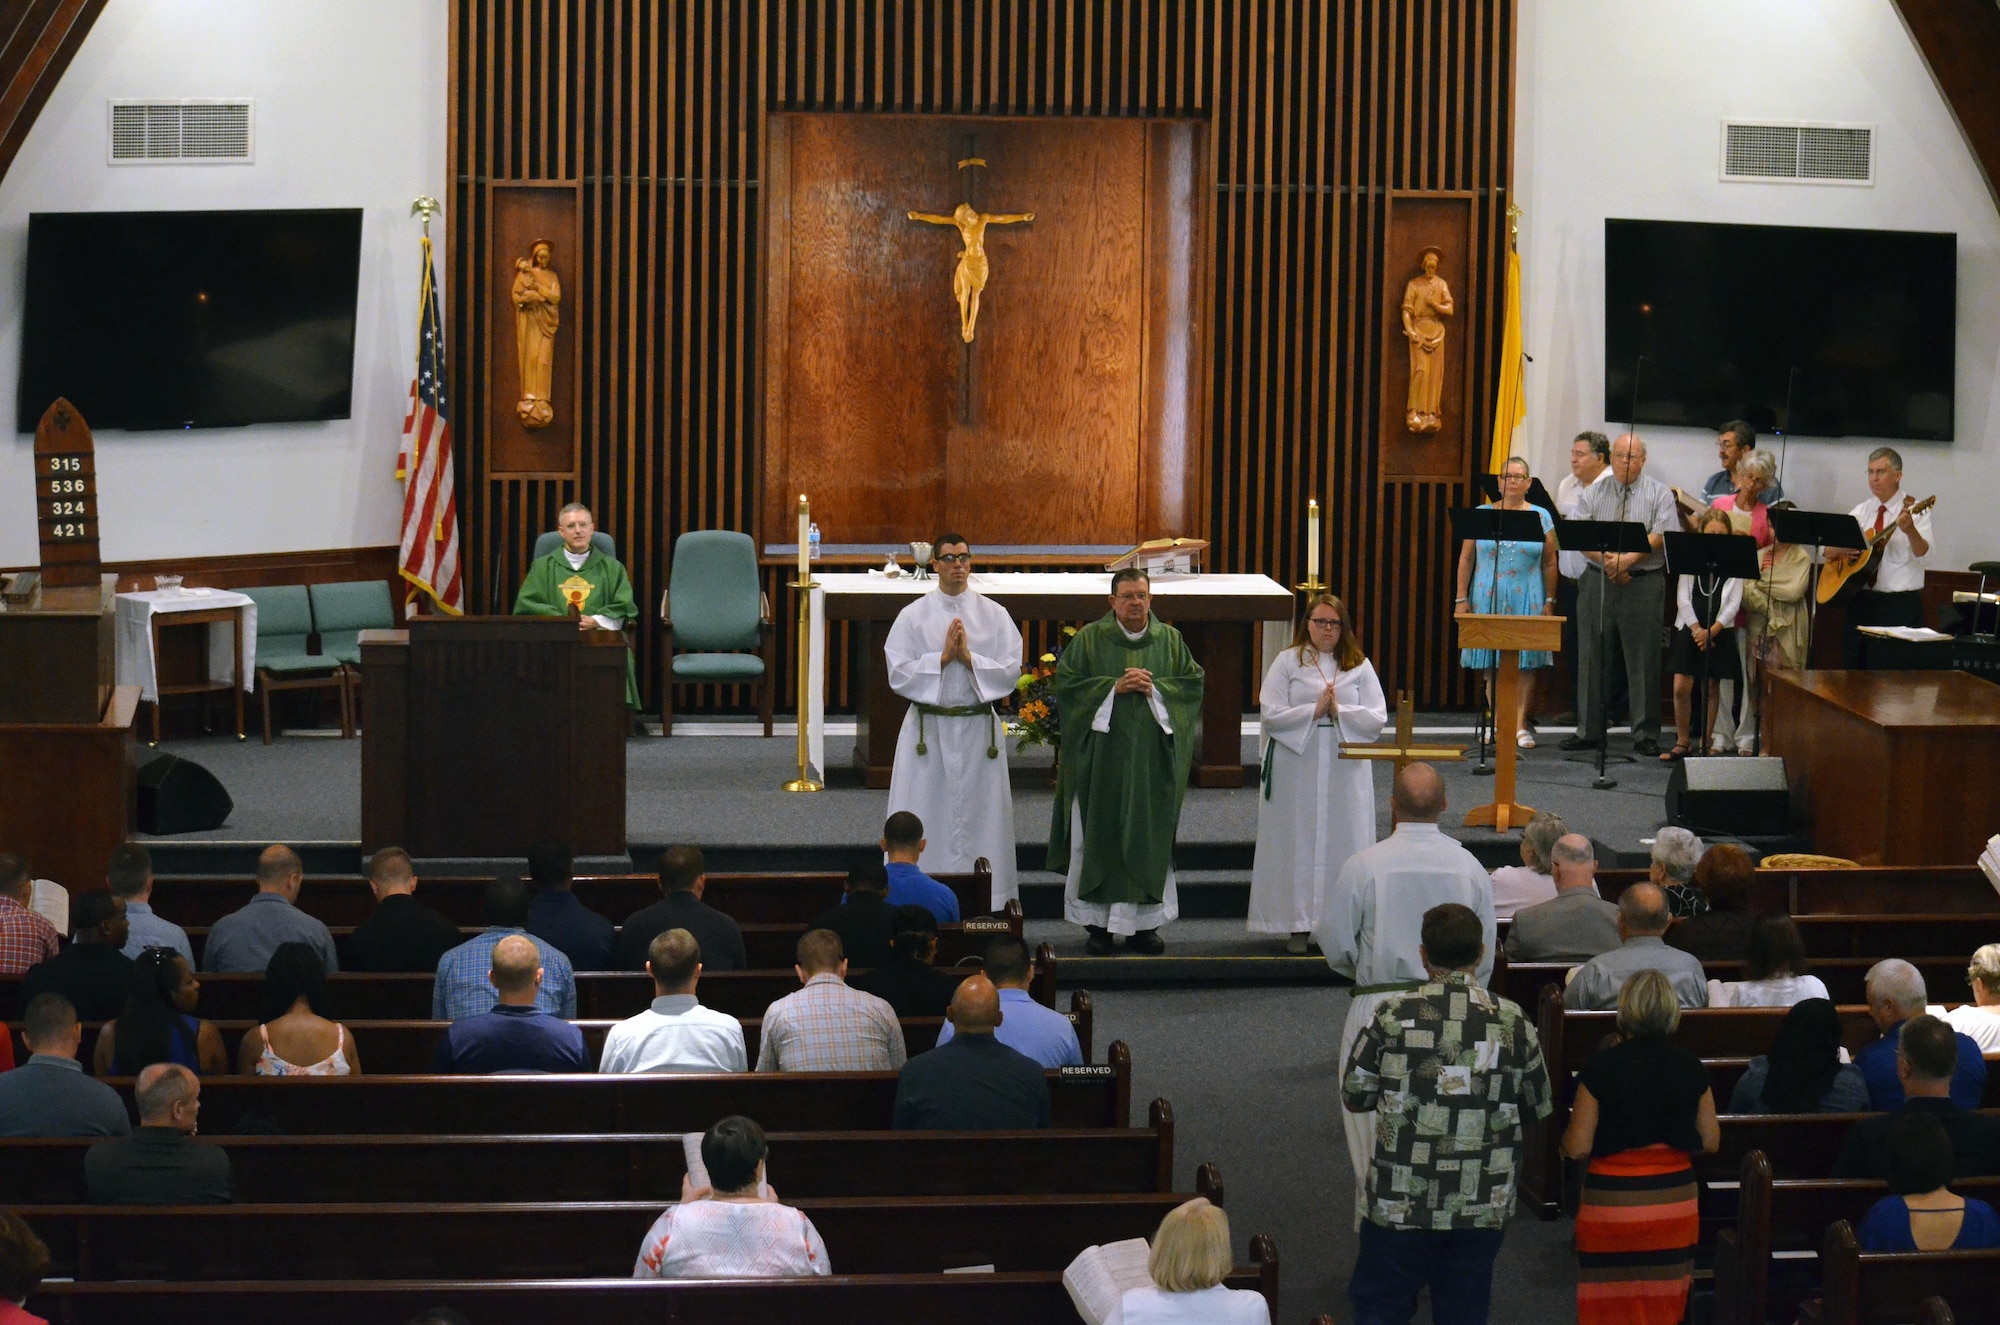 Chaplain candidates and members of the Catholic church attend Sunday morning worship in the base chapel at Robins Air Force Base, Georgia, July 25, 2016. The candidates are participating in the Air Force Reserve Command Chaplain Candidate Intensive Interview program which aims to provide an extensive overview of what the Air Force Reserve mission is as well as a broad overview of the military chaplain corps. During the last week of the AFRC program, the candidates were immersed in fast-paced mobility training conducted by active-duty instructors from the 5th Combat Communications Squadron Support. (U.S. Air Force photo/Tech. Sgt. Kelly Goonan)